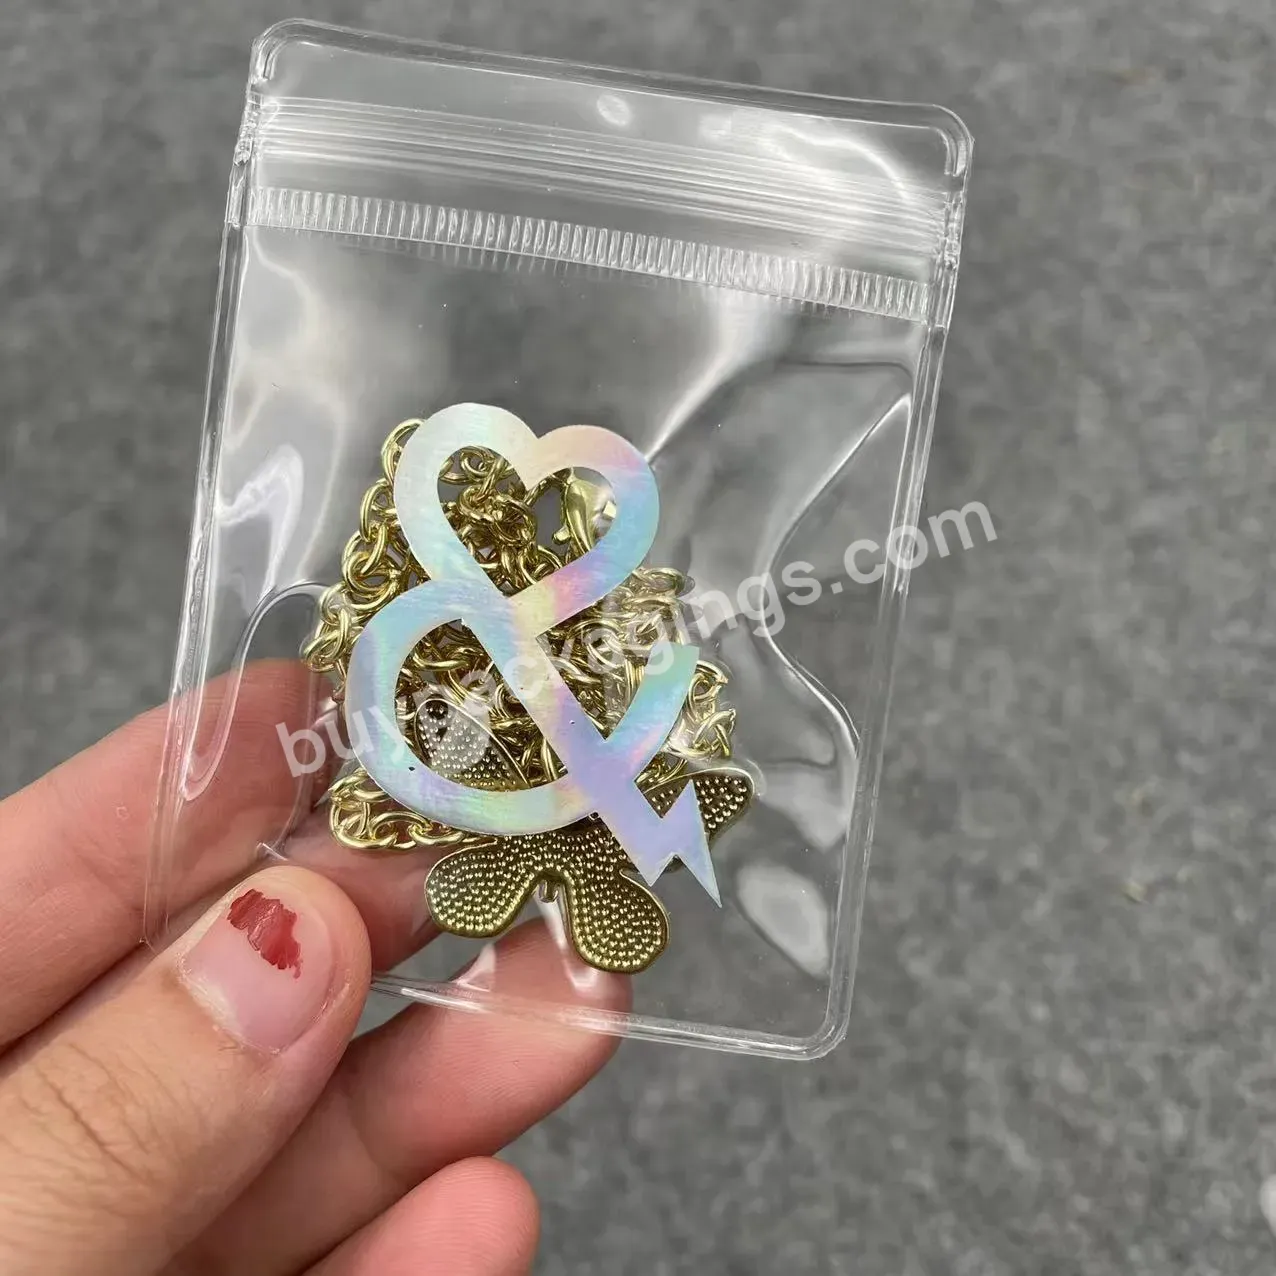 Customized Pvc Accessories Plastic Packaging Bag High Quality Jewelry Pouch With Zipper Jewelry Bag With Holographic Logo - Buy Jewelry Pouch Packaging Bag Pvc Jewelry Bag,Zipper Jewelry Case Zipper Jewelry Bag,Pvc Bag Accessories Plastic Bag.